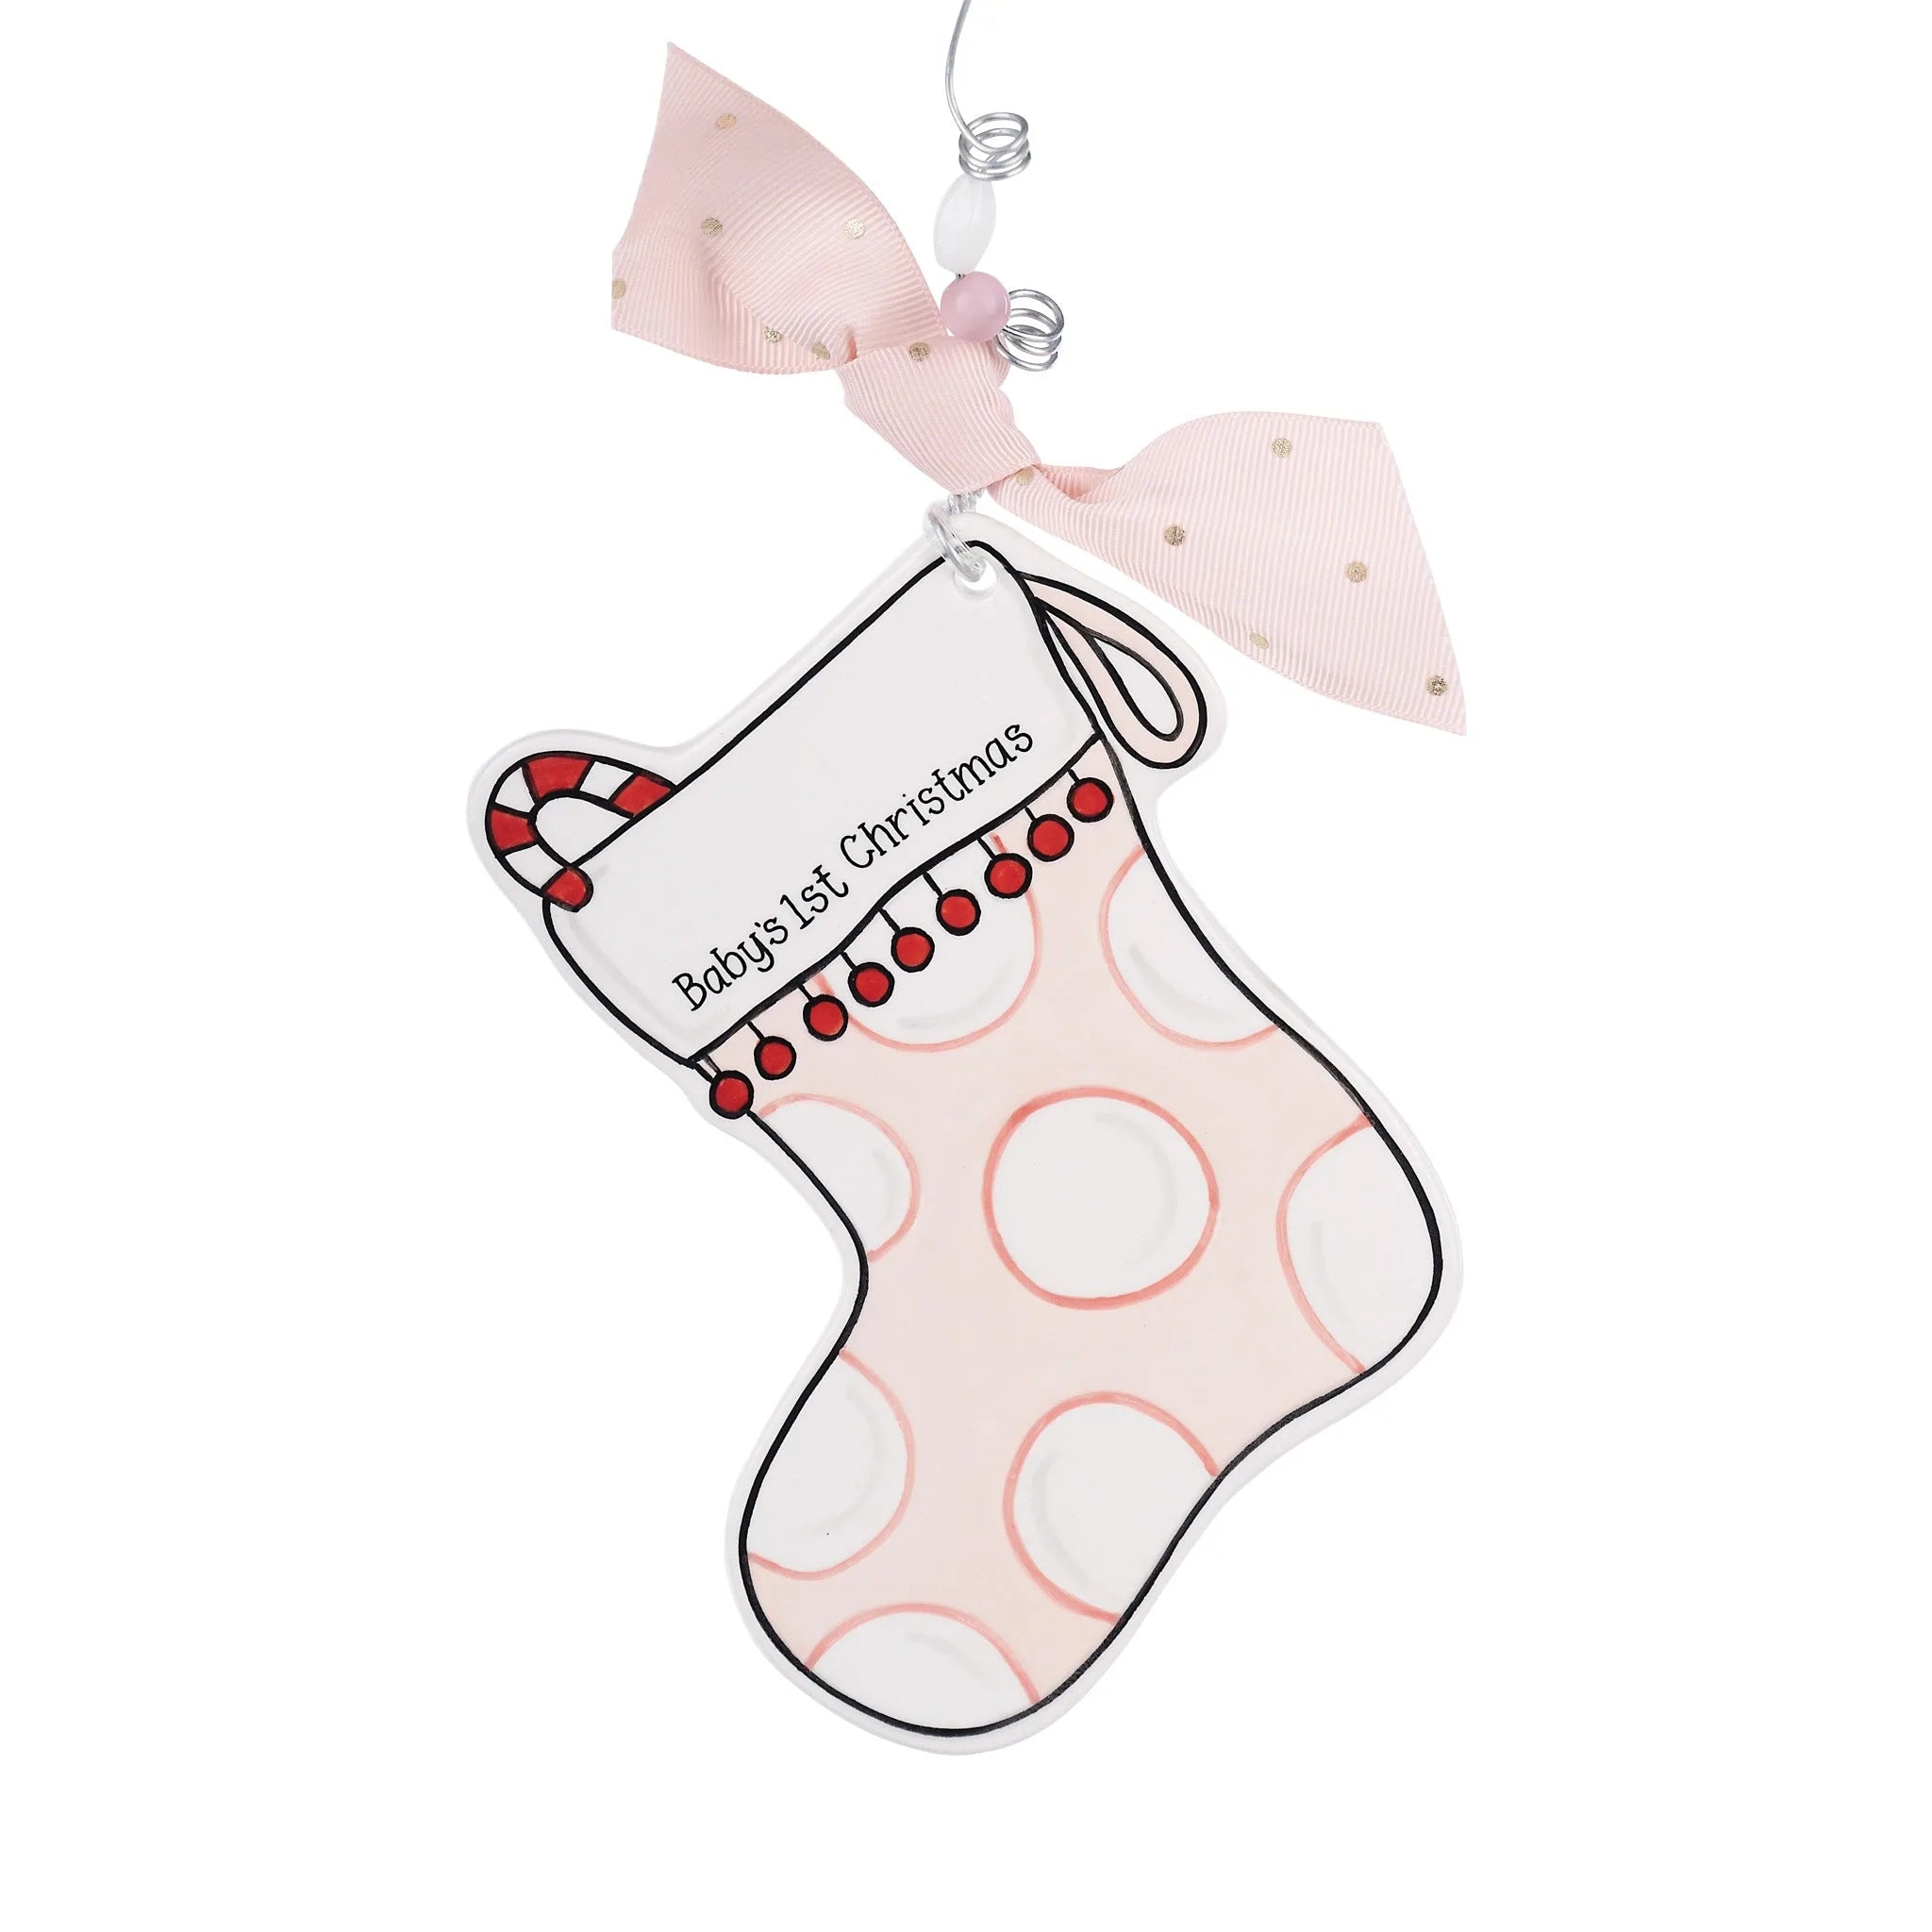 Glory Haus Baby's 1st Christmas Pink Stocking Flat Ornament (Unboxed)-GLORY HAUS-Little Giant Kidz